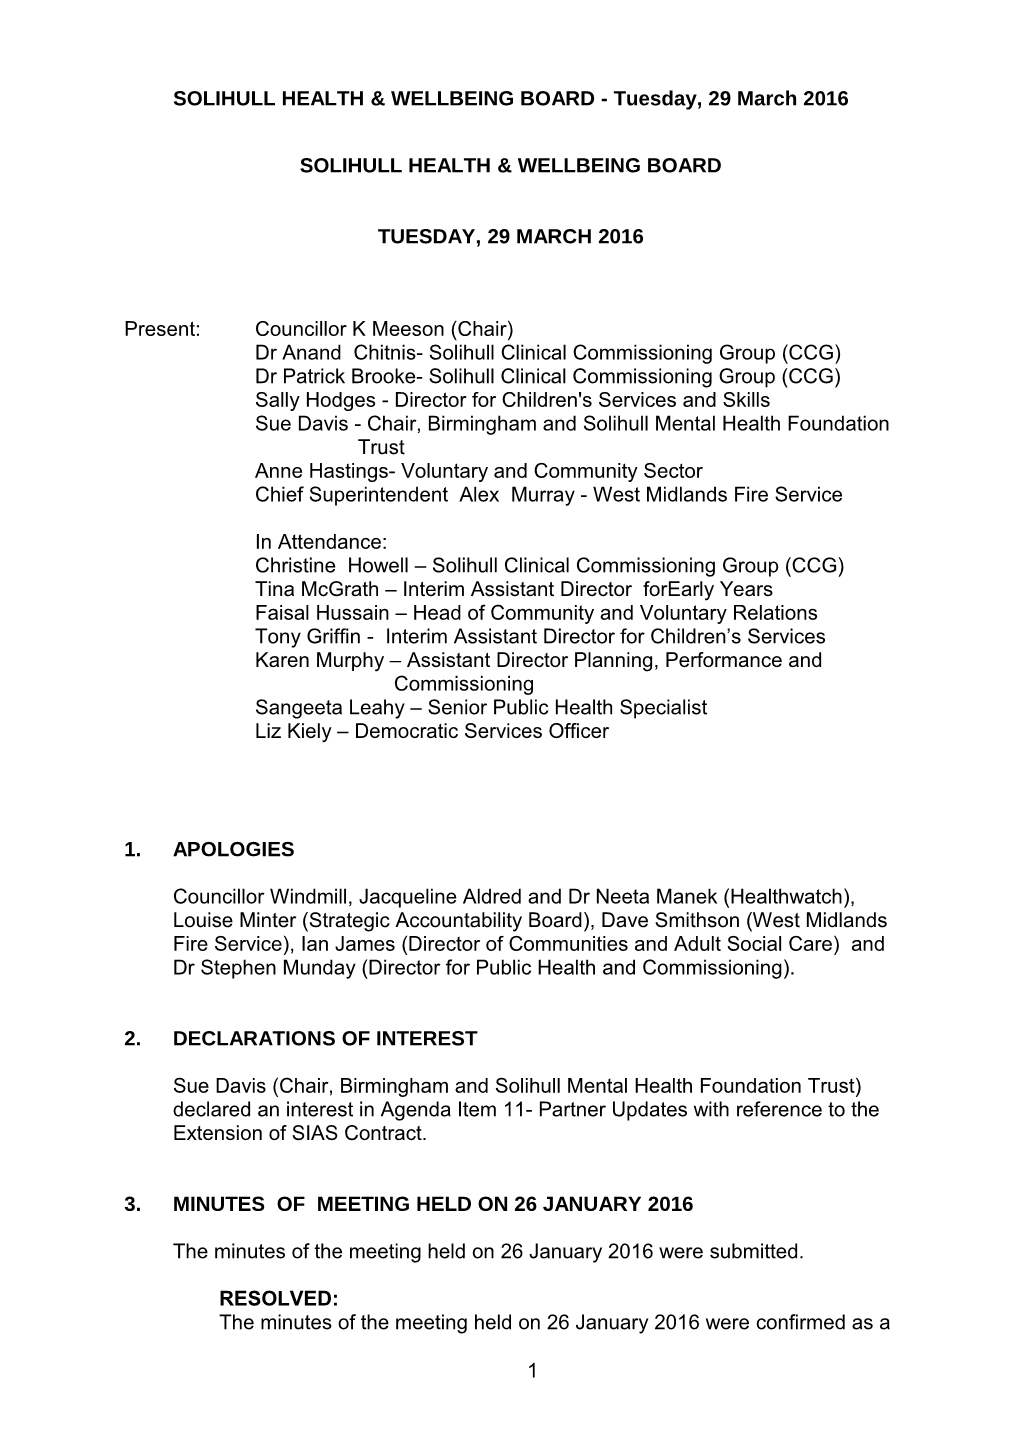 Solihull Health & Wellbeing Board - 29 March 2016